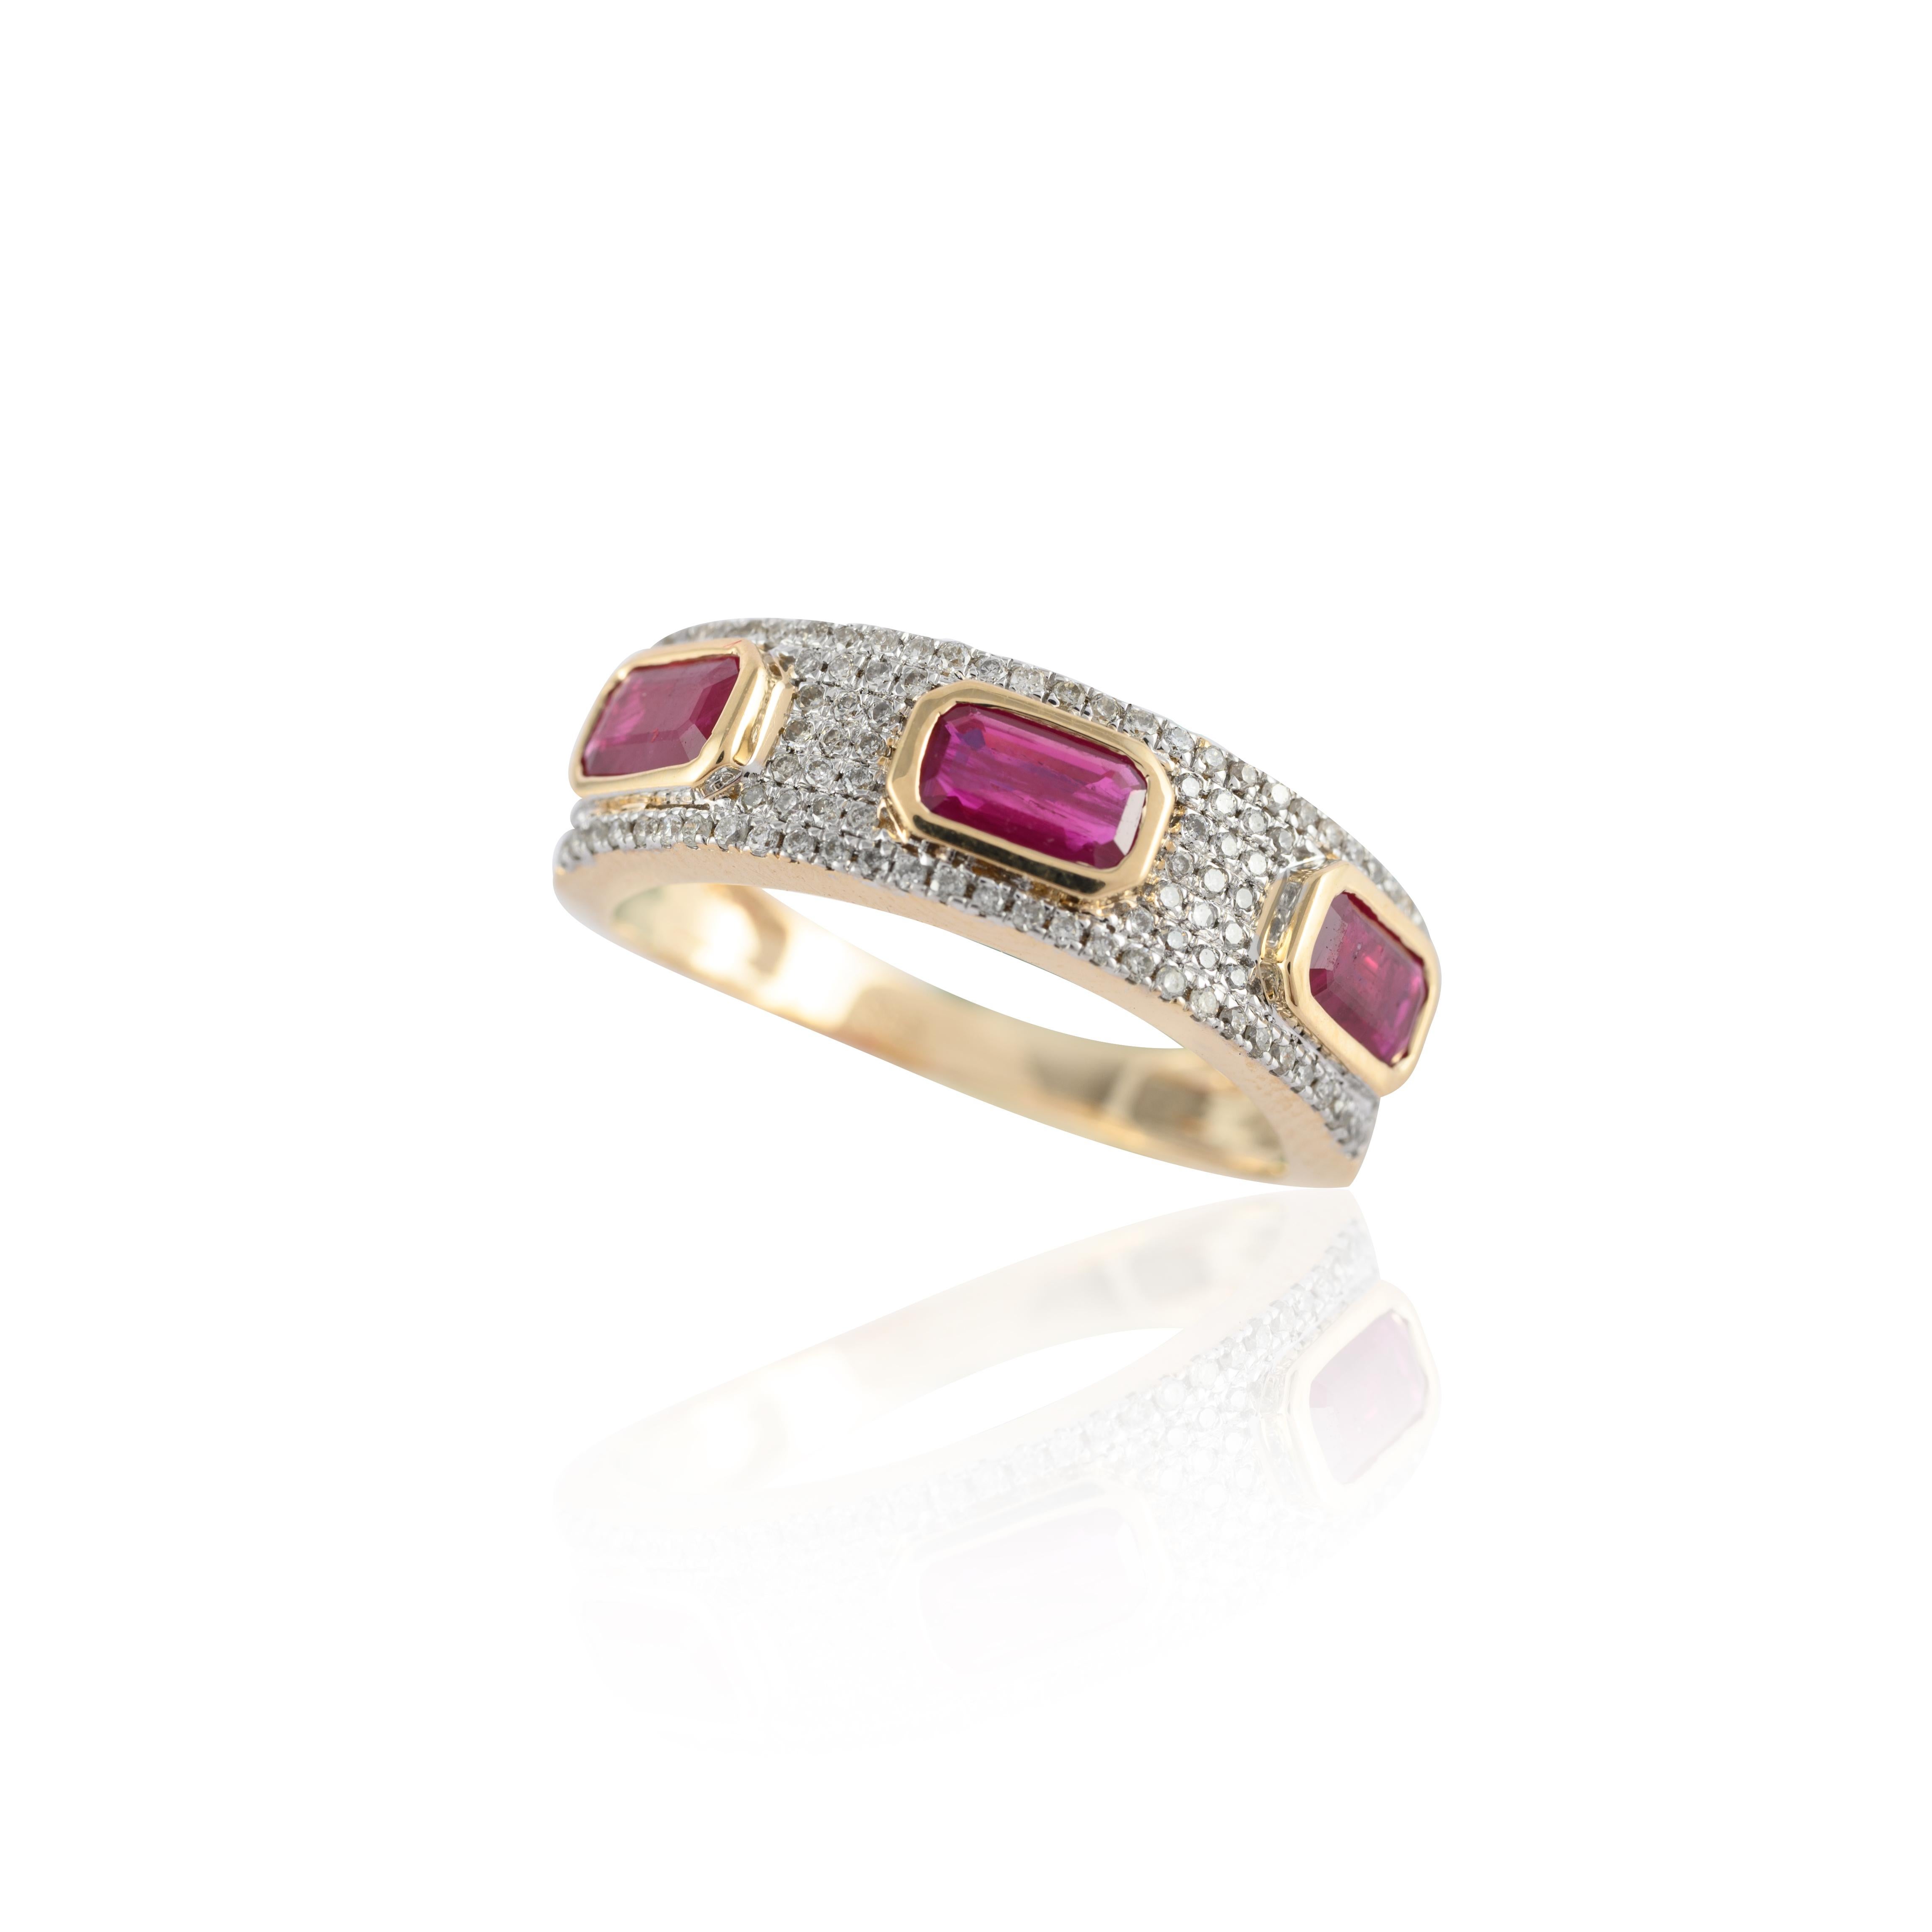 For Sale:  Statement Diamond Ruby Band Ring Gift for Him in 14k Solid Yellow Gold 5